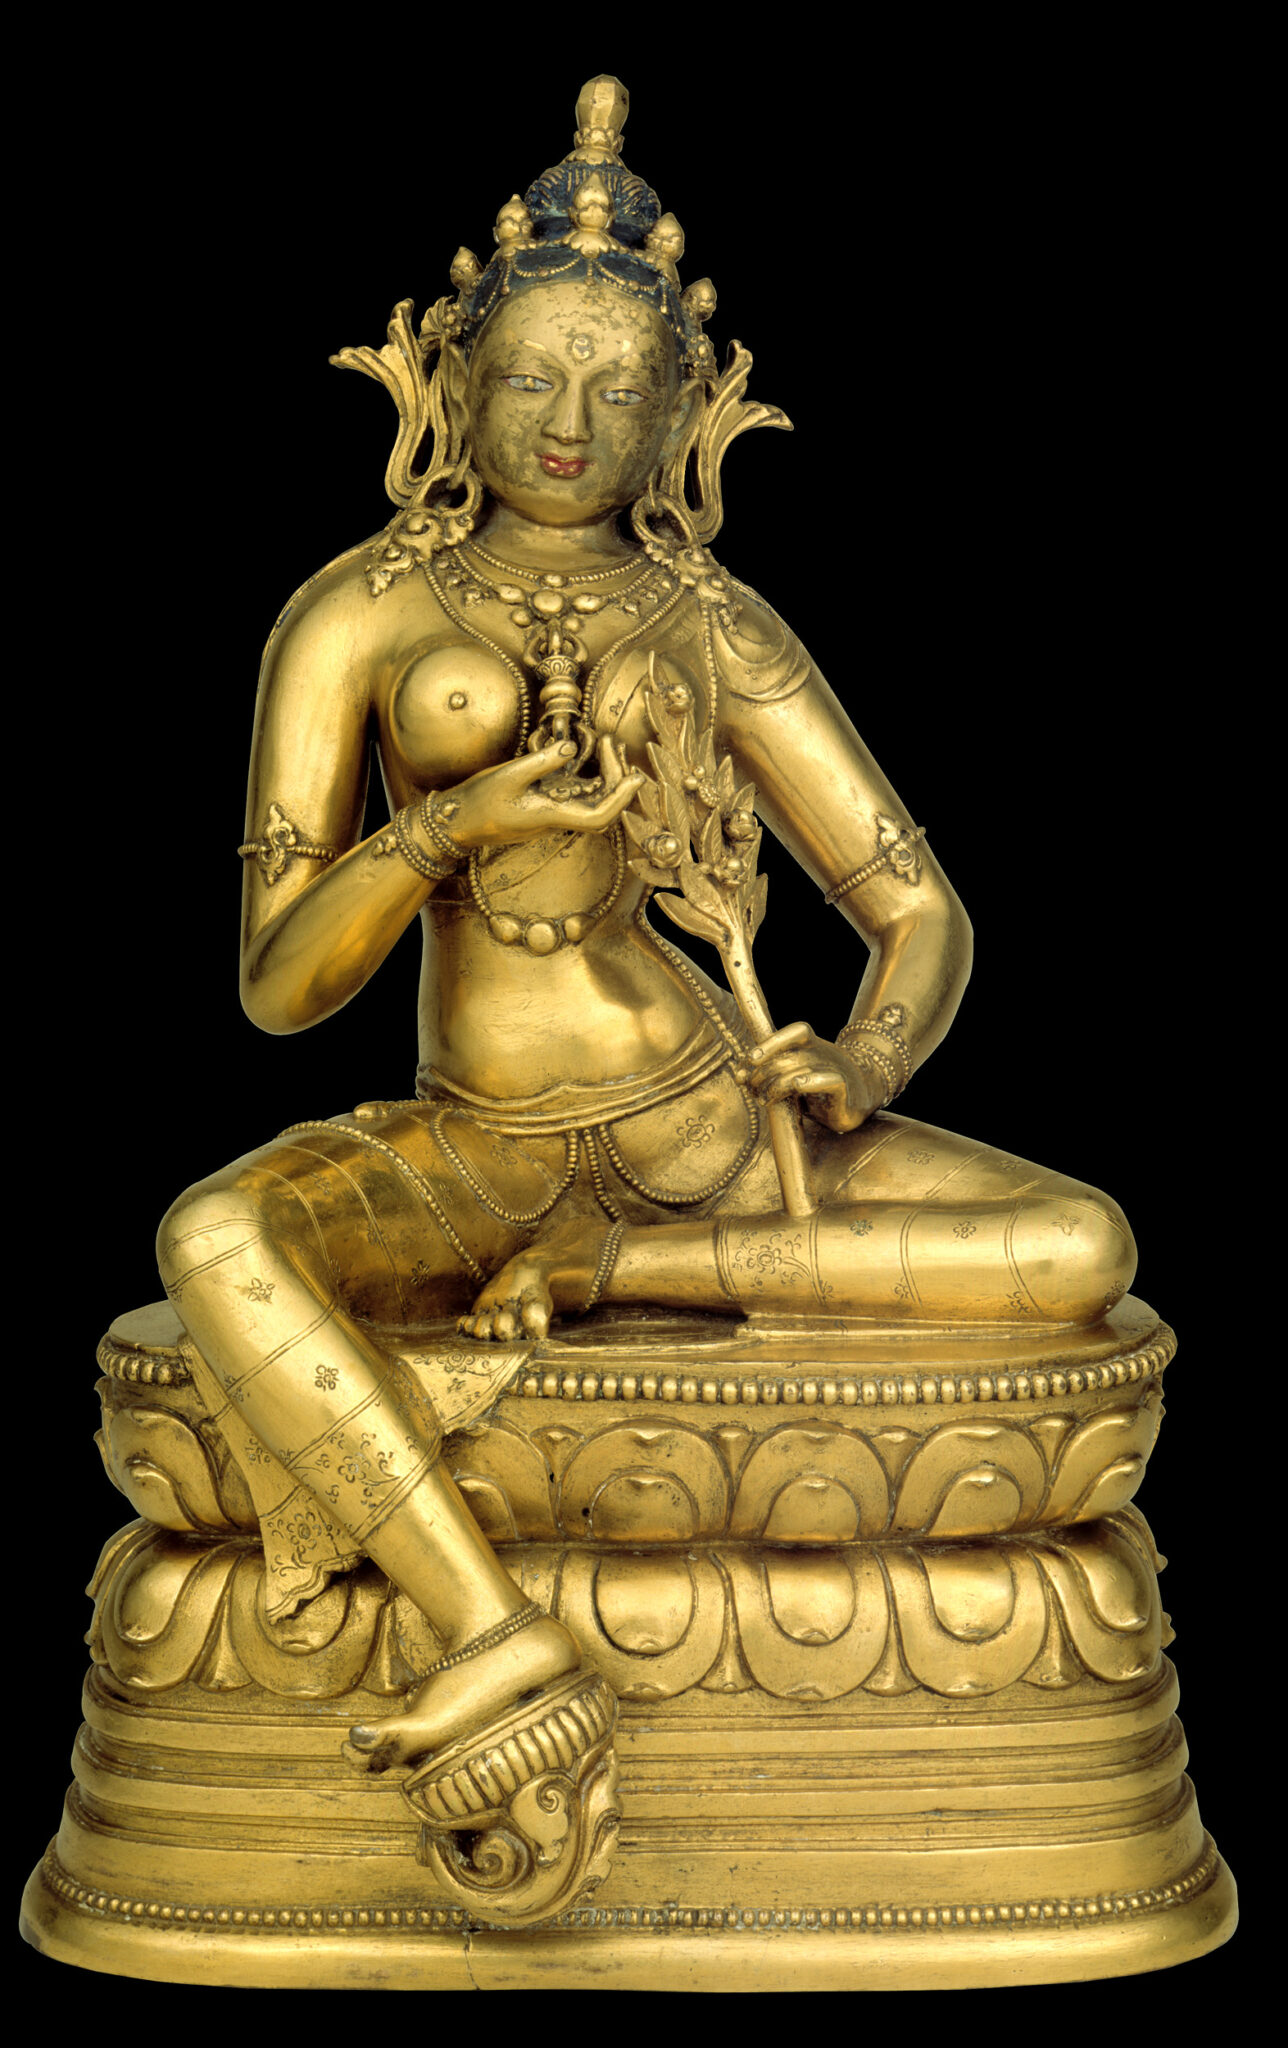 Golden statue depicting goddess seated on lotus pedestal holding vajra in left hand at chest